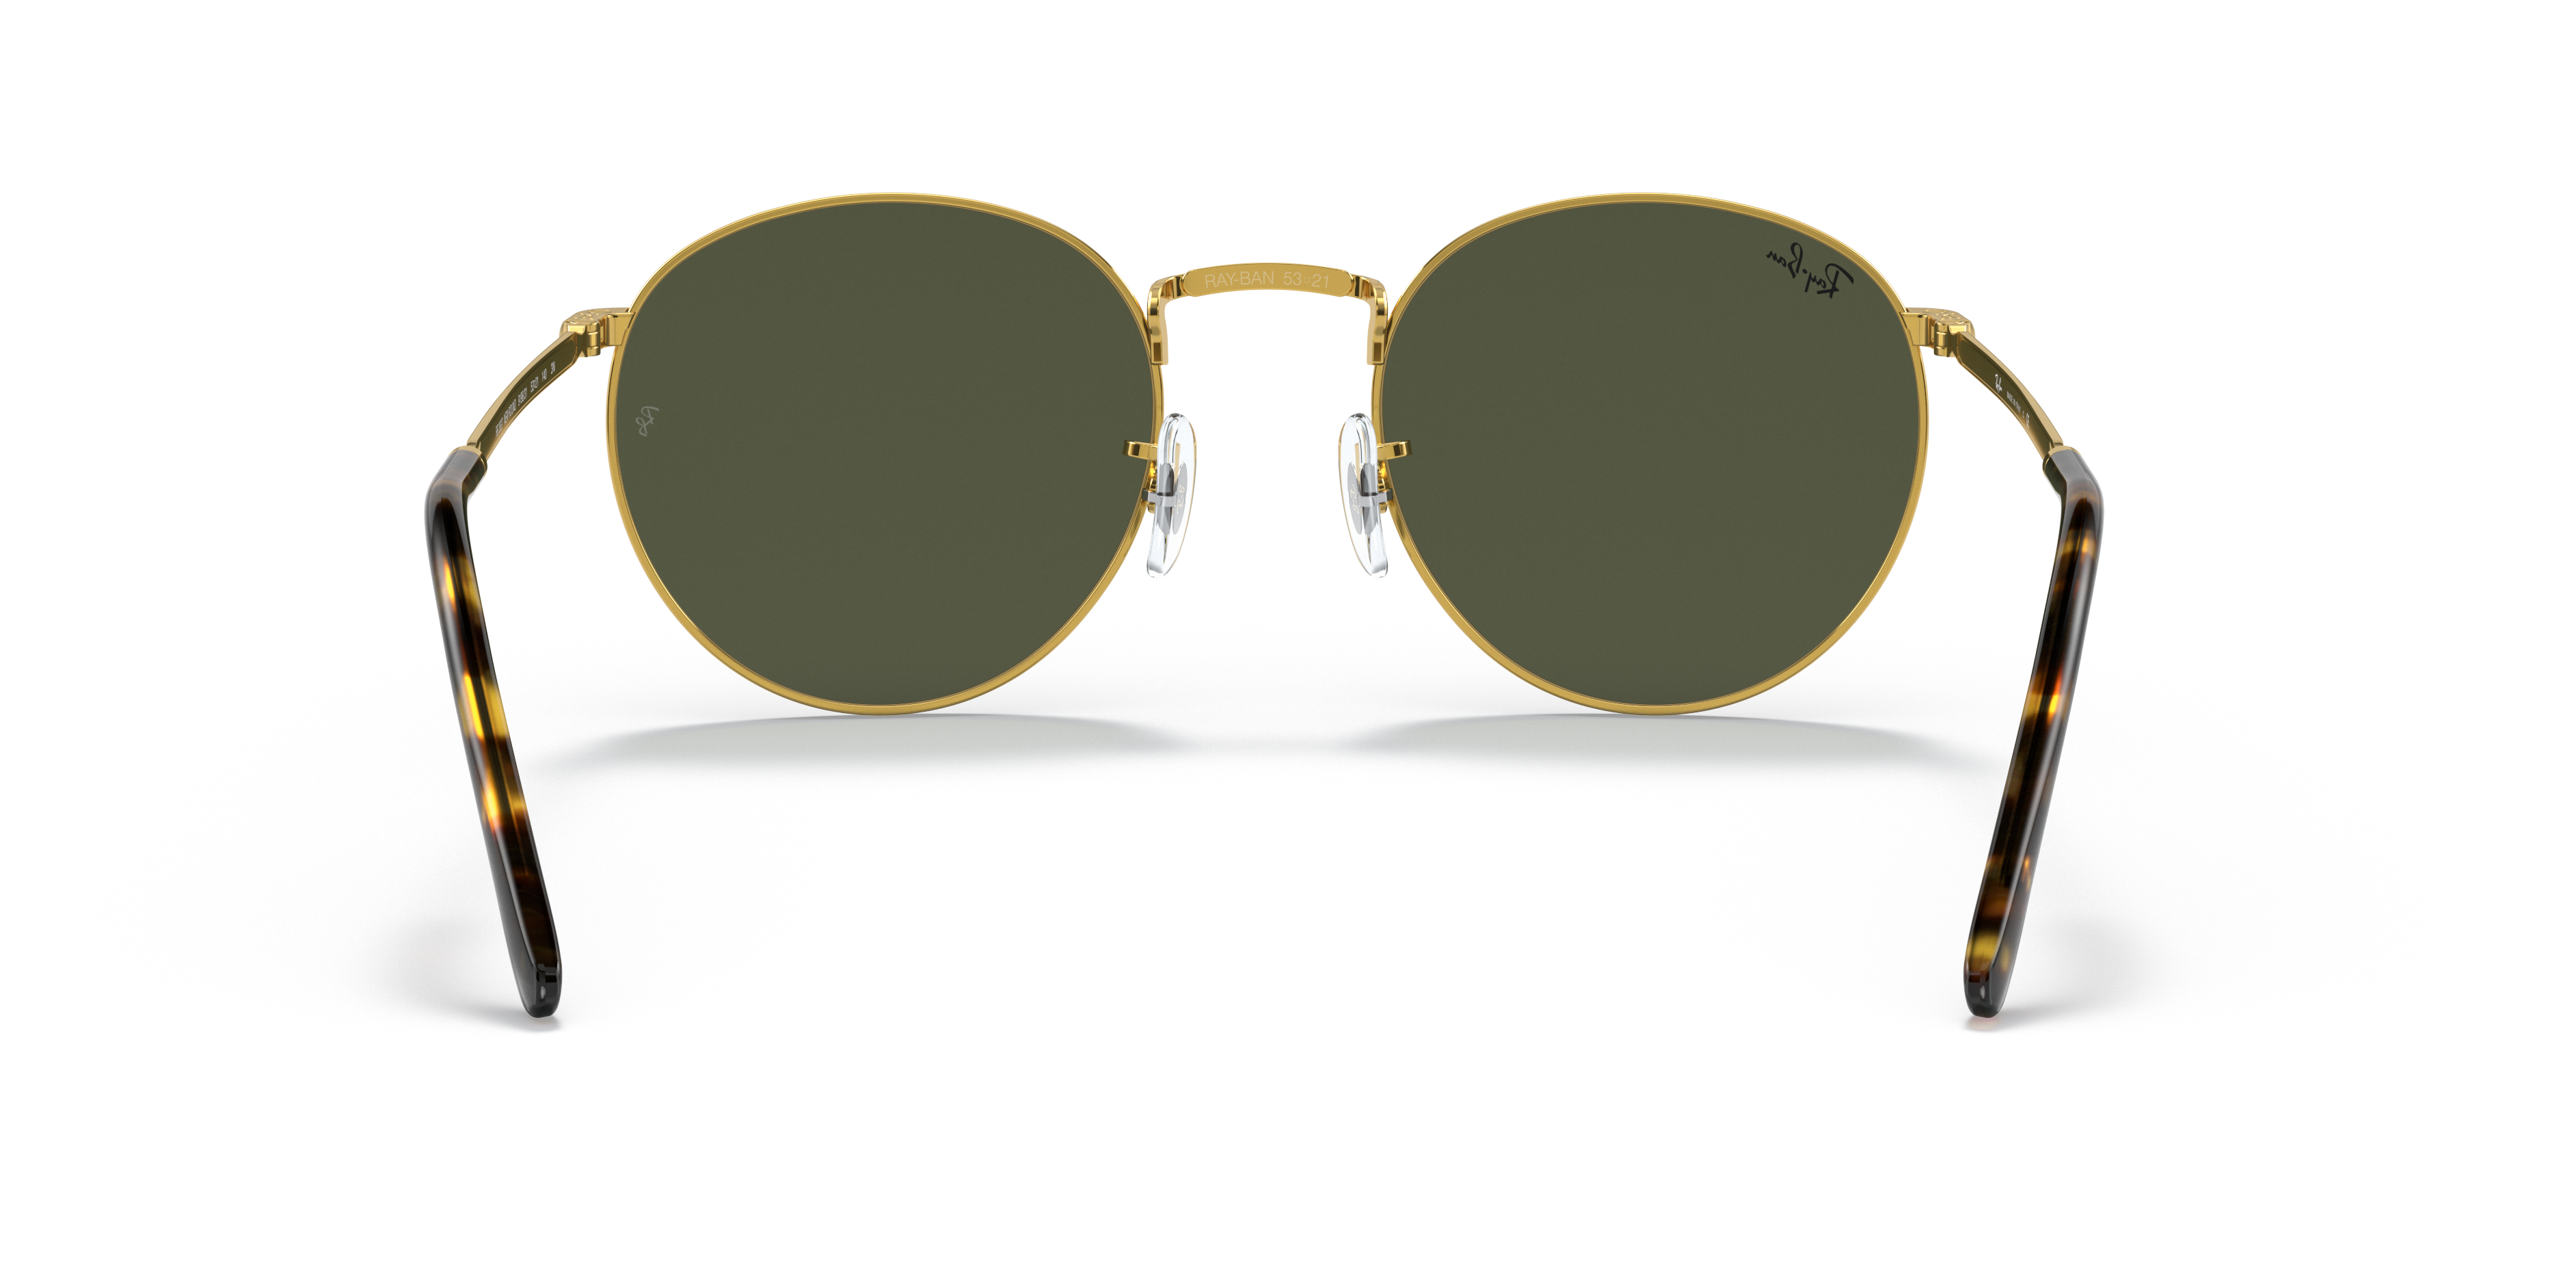 New Round Sunglasses in Legend Gold and Green | Ray-Ban®